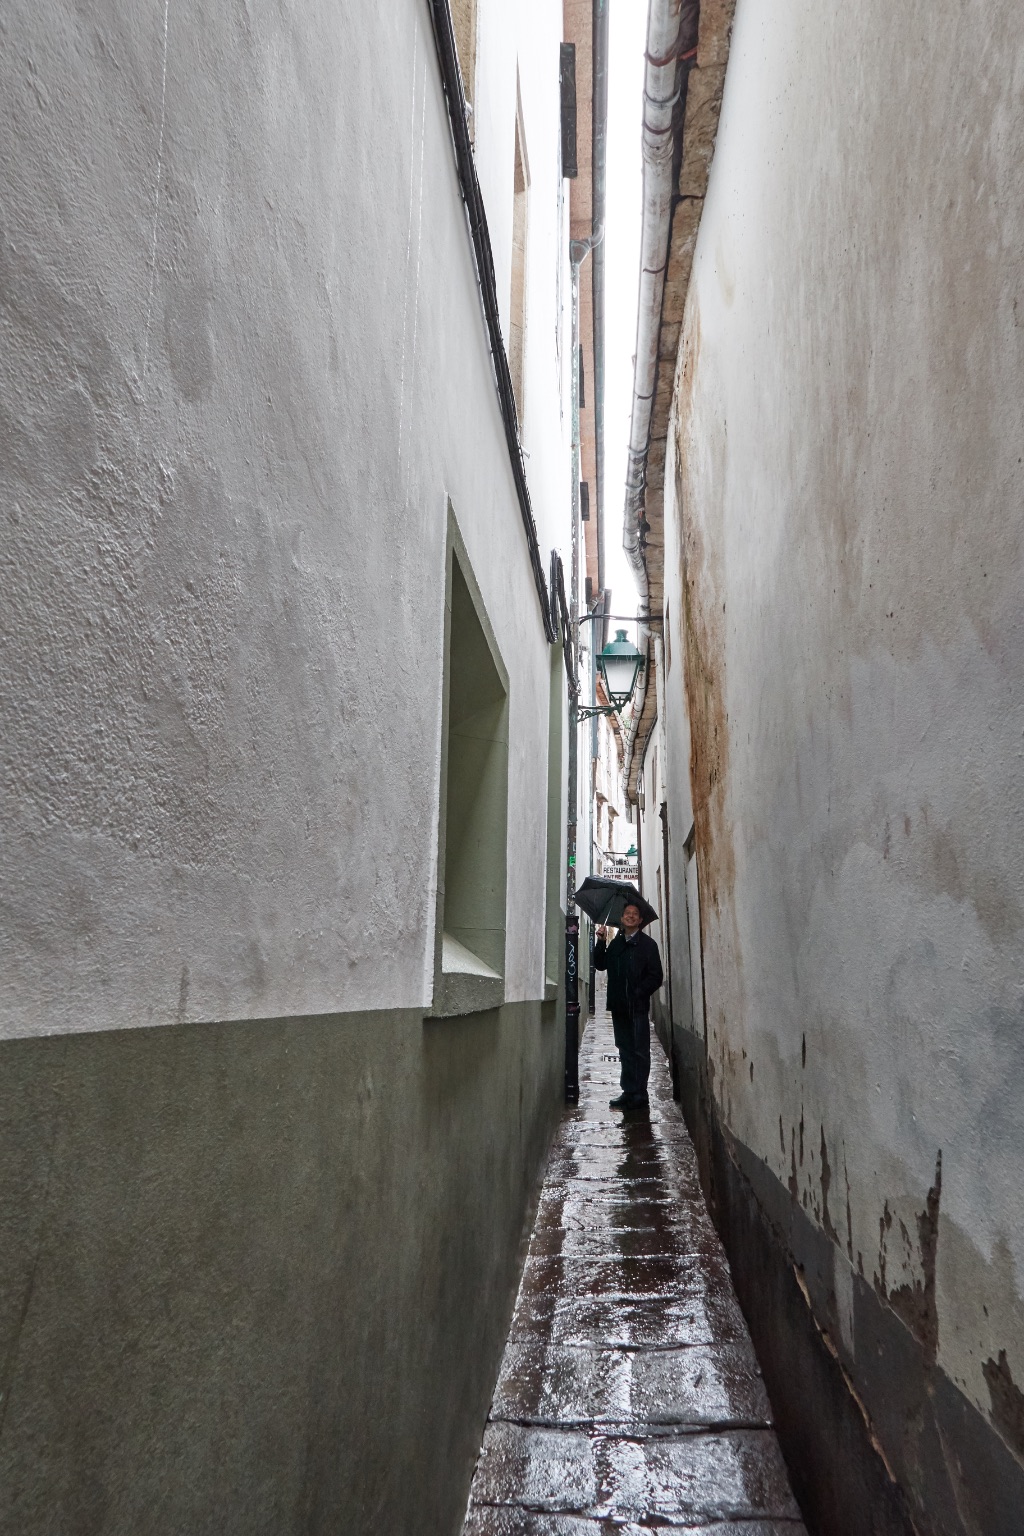 The narrowest passage in the old town